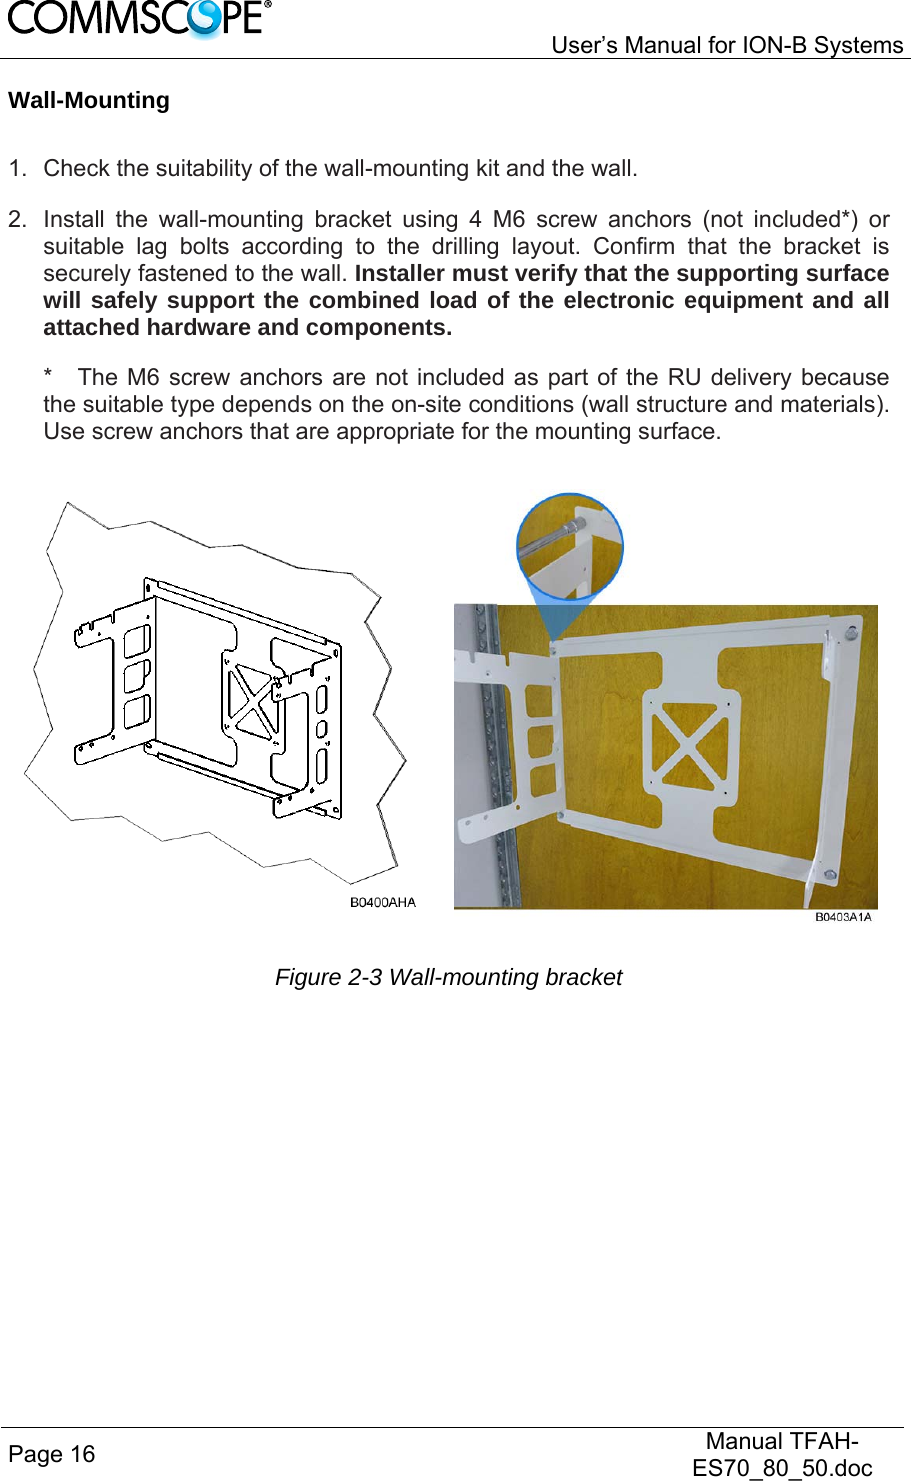   User’s Manual for ION-B Systems Page 16   Manual TFAH-ES70_80_50.doc  Wall-Mounting  1.  Check the suitability of the wall-mounting kit and the wall. 2.  Install the wall-mounting bracket using 4 M6 screw anchors (not included*) or suitable lag bolts according to the drilling layout. Confirm that the bracket is securely fastened to the wall. Installer must verify that the supporting surface will safely support the combined load of the electronic equipment and all attached hardware and components. *  The M6 screw anchors are not included as part of the RU delivery because the suitable type depends on the on-site conditions (wall structure and materials). Use screw anchors that are appropriate for the mounting surface.  Figure 2-3 Wall-mounting bracket 